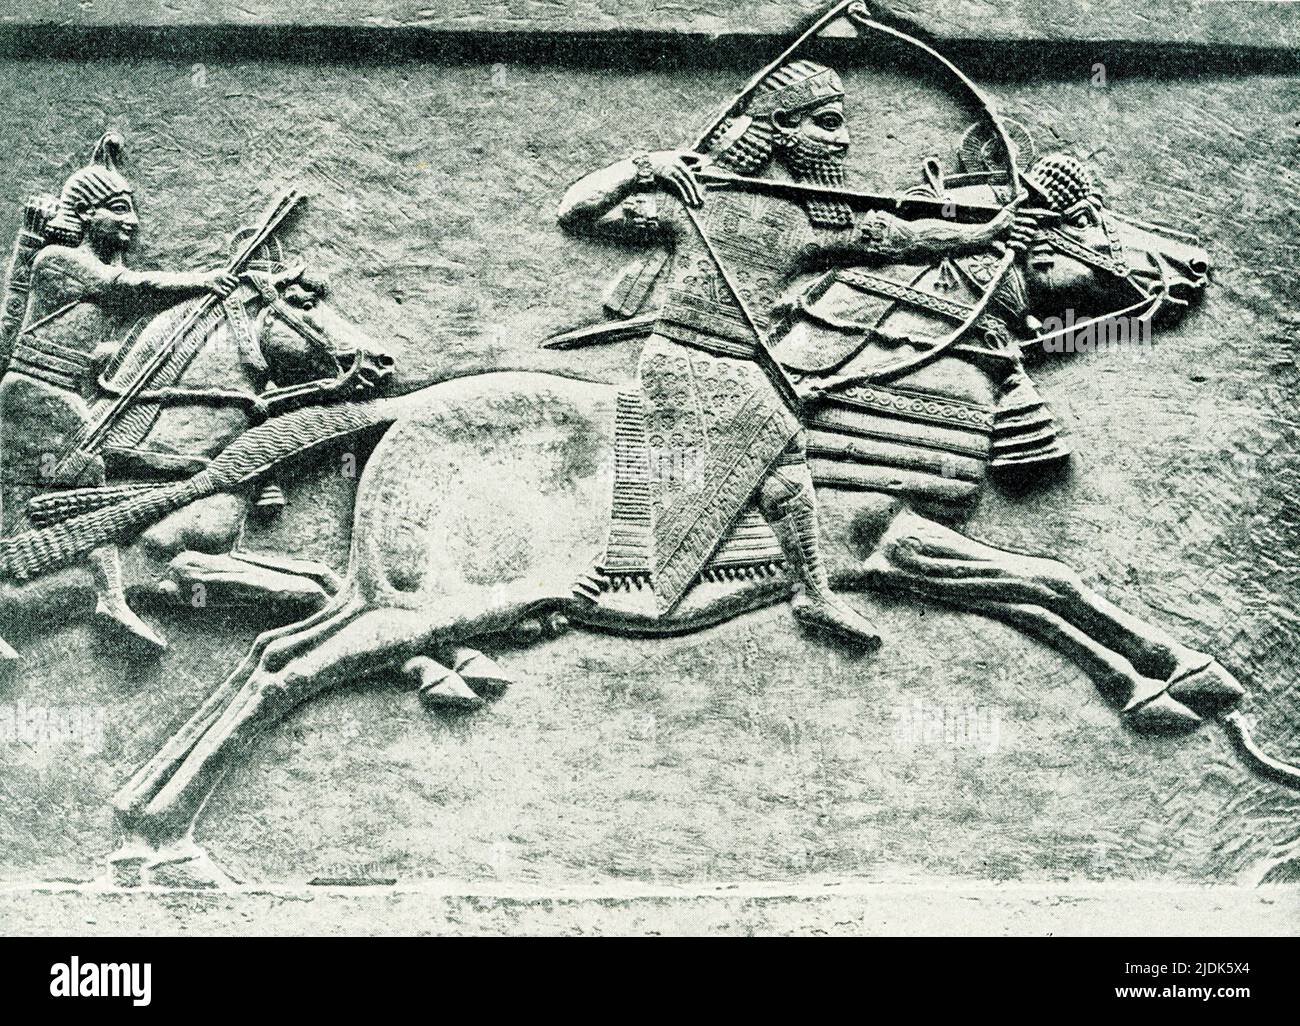 This 1910 image shows an Assyrian king hunting. The stone relief is in the British Museum in London. Here, the king Ashurbanipal gallops forward, shooting at wild asses. One of the horsemen behind him has spare arrows and the other has a spare mount. Asses are shot or pulled down by dogs. Ashurbanipal ruled in 600s BC. Date of this relief uncovered at North Palace at Nineveh is 645-635 BC. Stock Photo